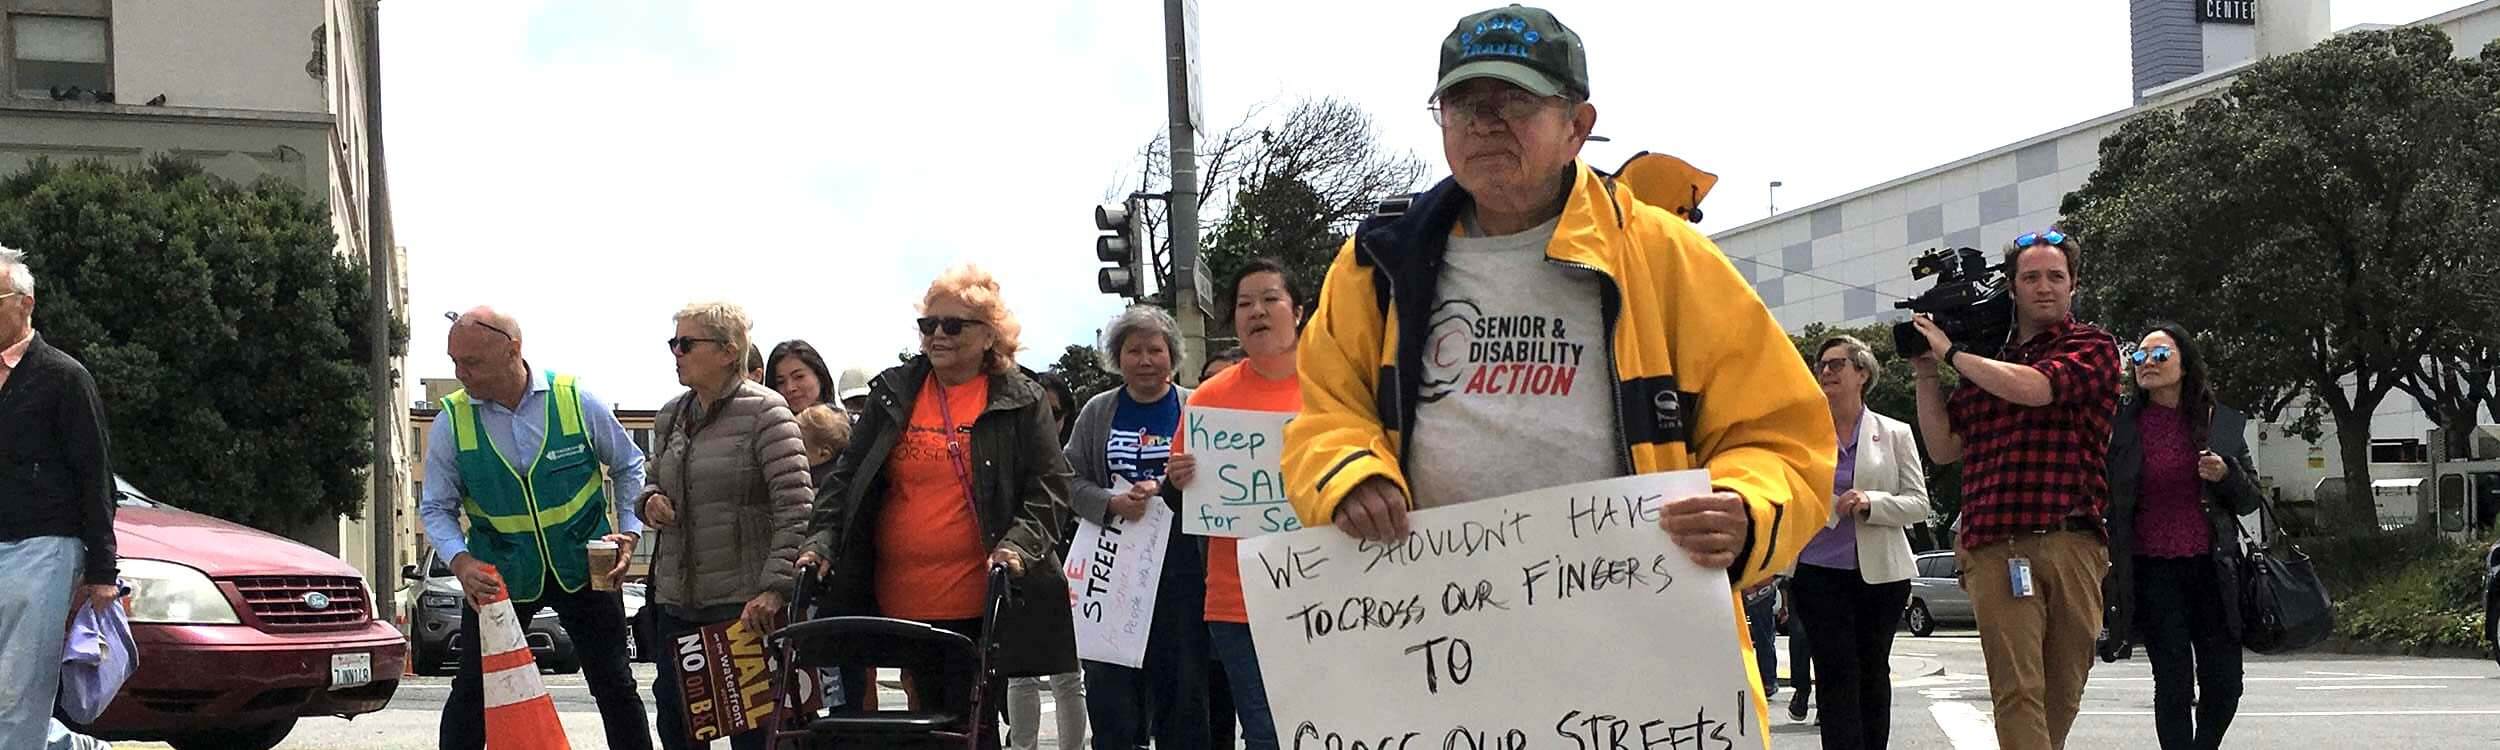 Safe Streets for Seniors and People with Disabilities